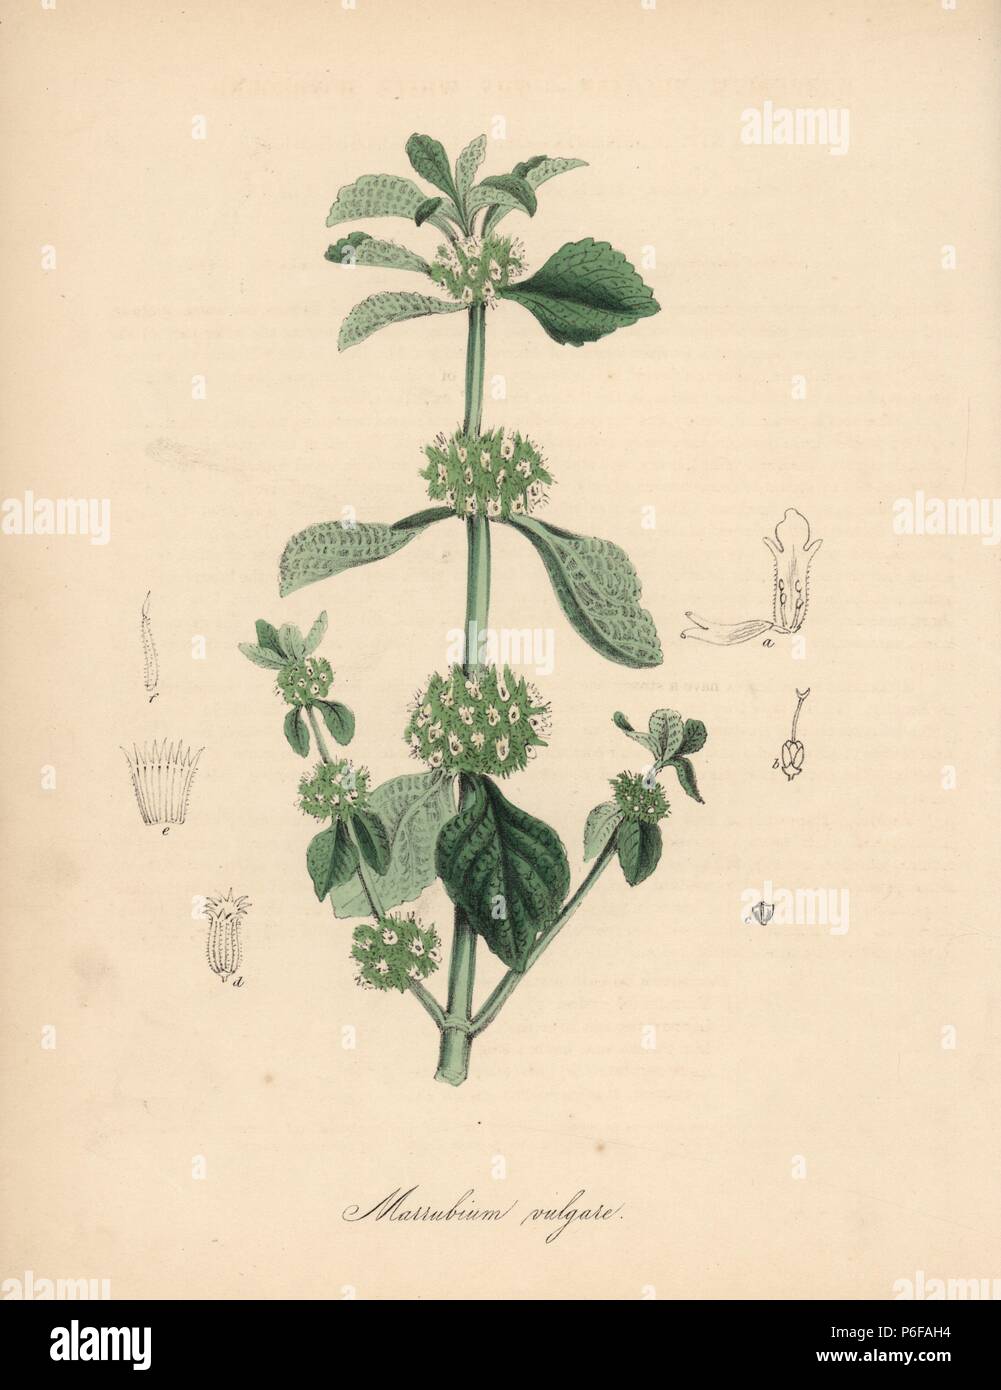 White horehound, Marrubium vulgare. Handcoloured zincograph by C. Chabot drawn by Miss M. A. Burnett from her 'Plantae Utiliores: or Illustrations of Useful Plants,' Whittaker, London, 1842. Miss Burnett drew the botanical illustrations, but the text was chiefly by her late brother, British botanist Gilbert Thomas Burnett (1800-1835). Stock Photo